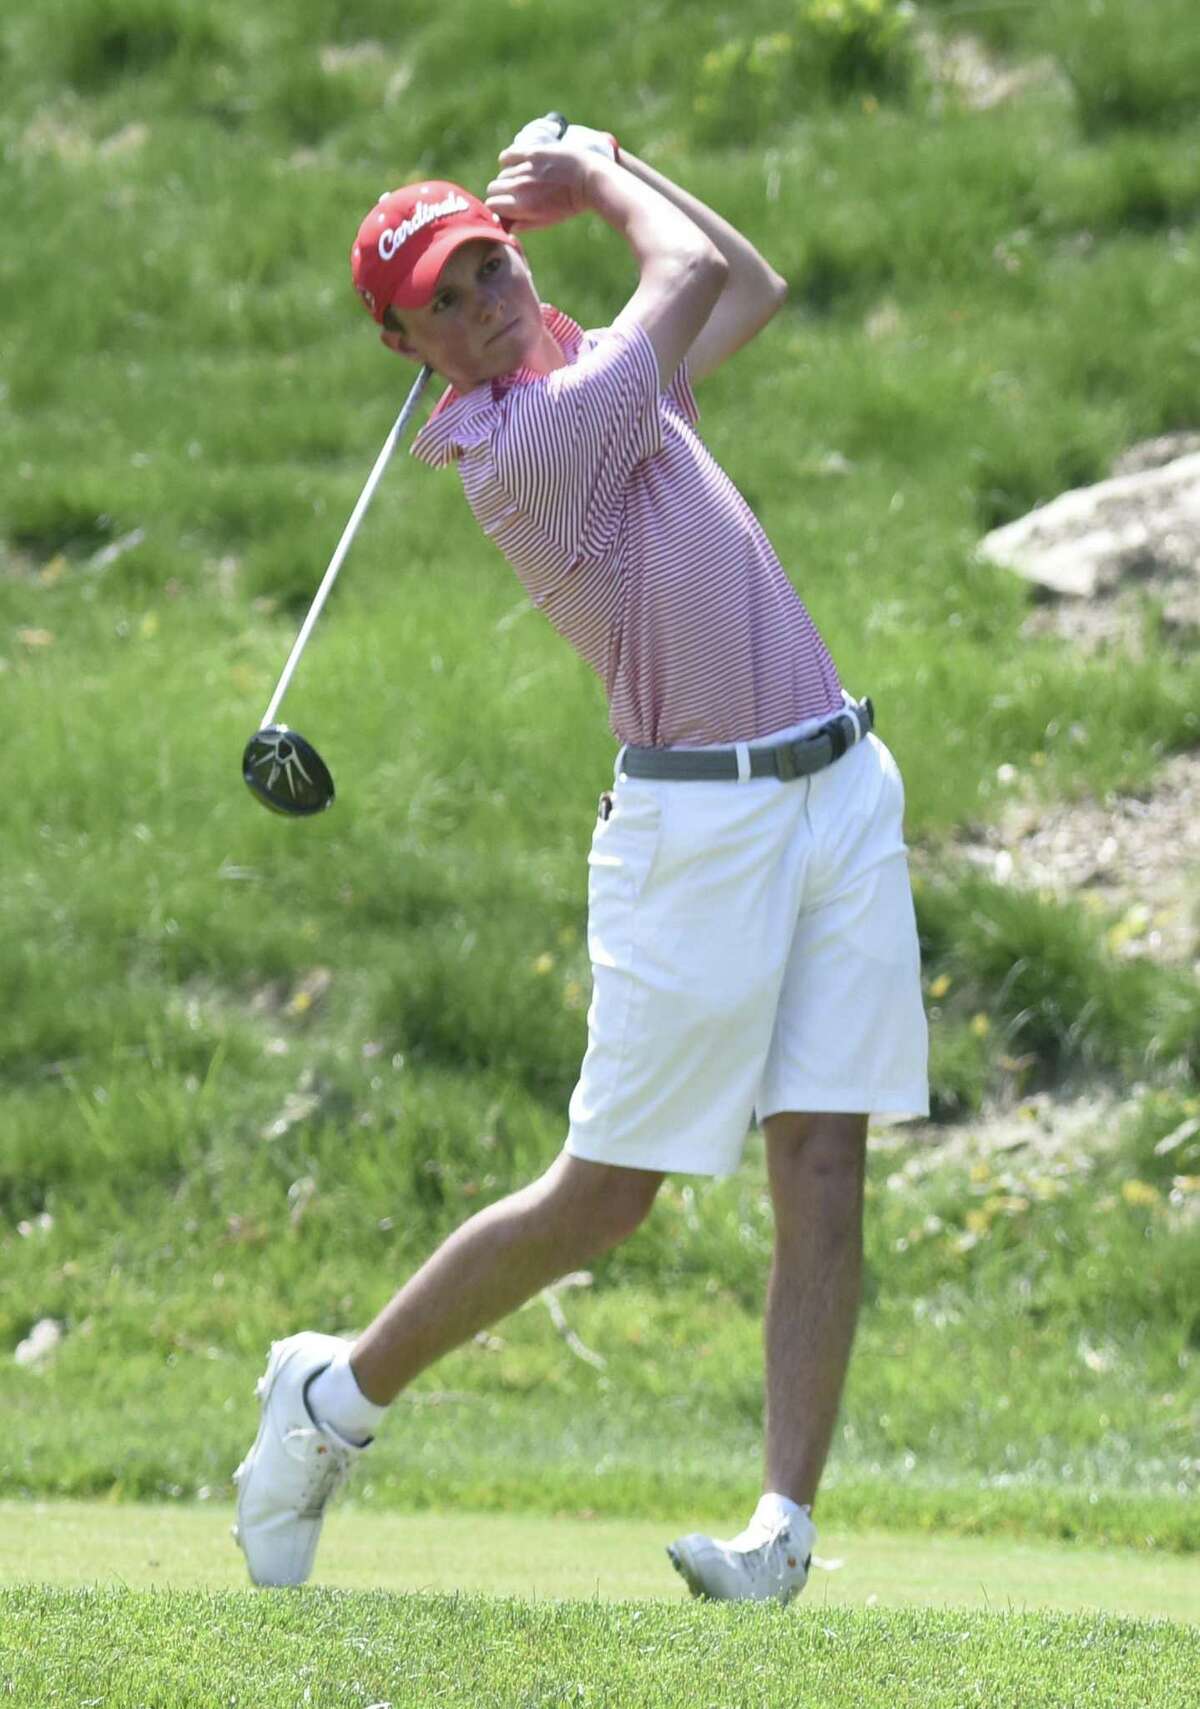 Greenwich’s Jackson Fretty competes in the first annual Greenwich Invitational high school golf match at the Greenwich Country Club last season.